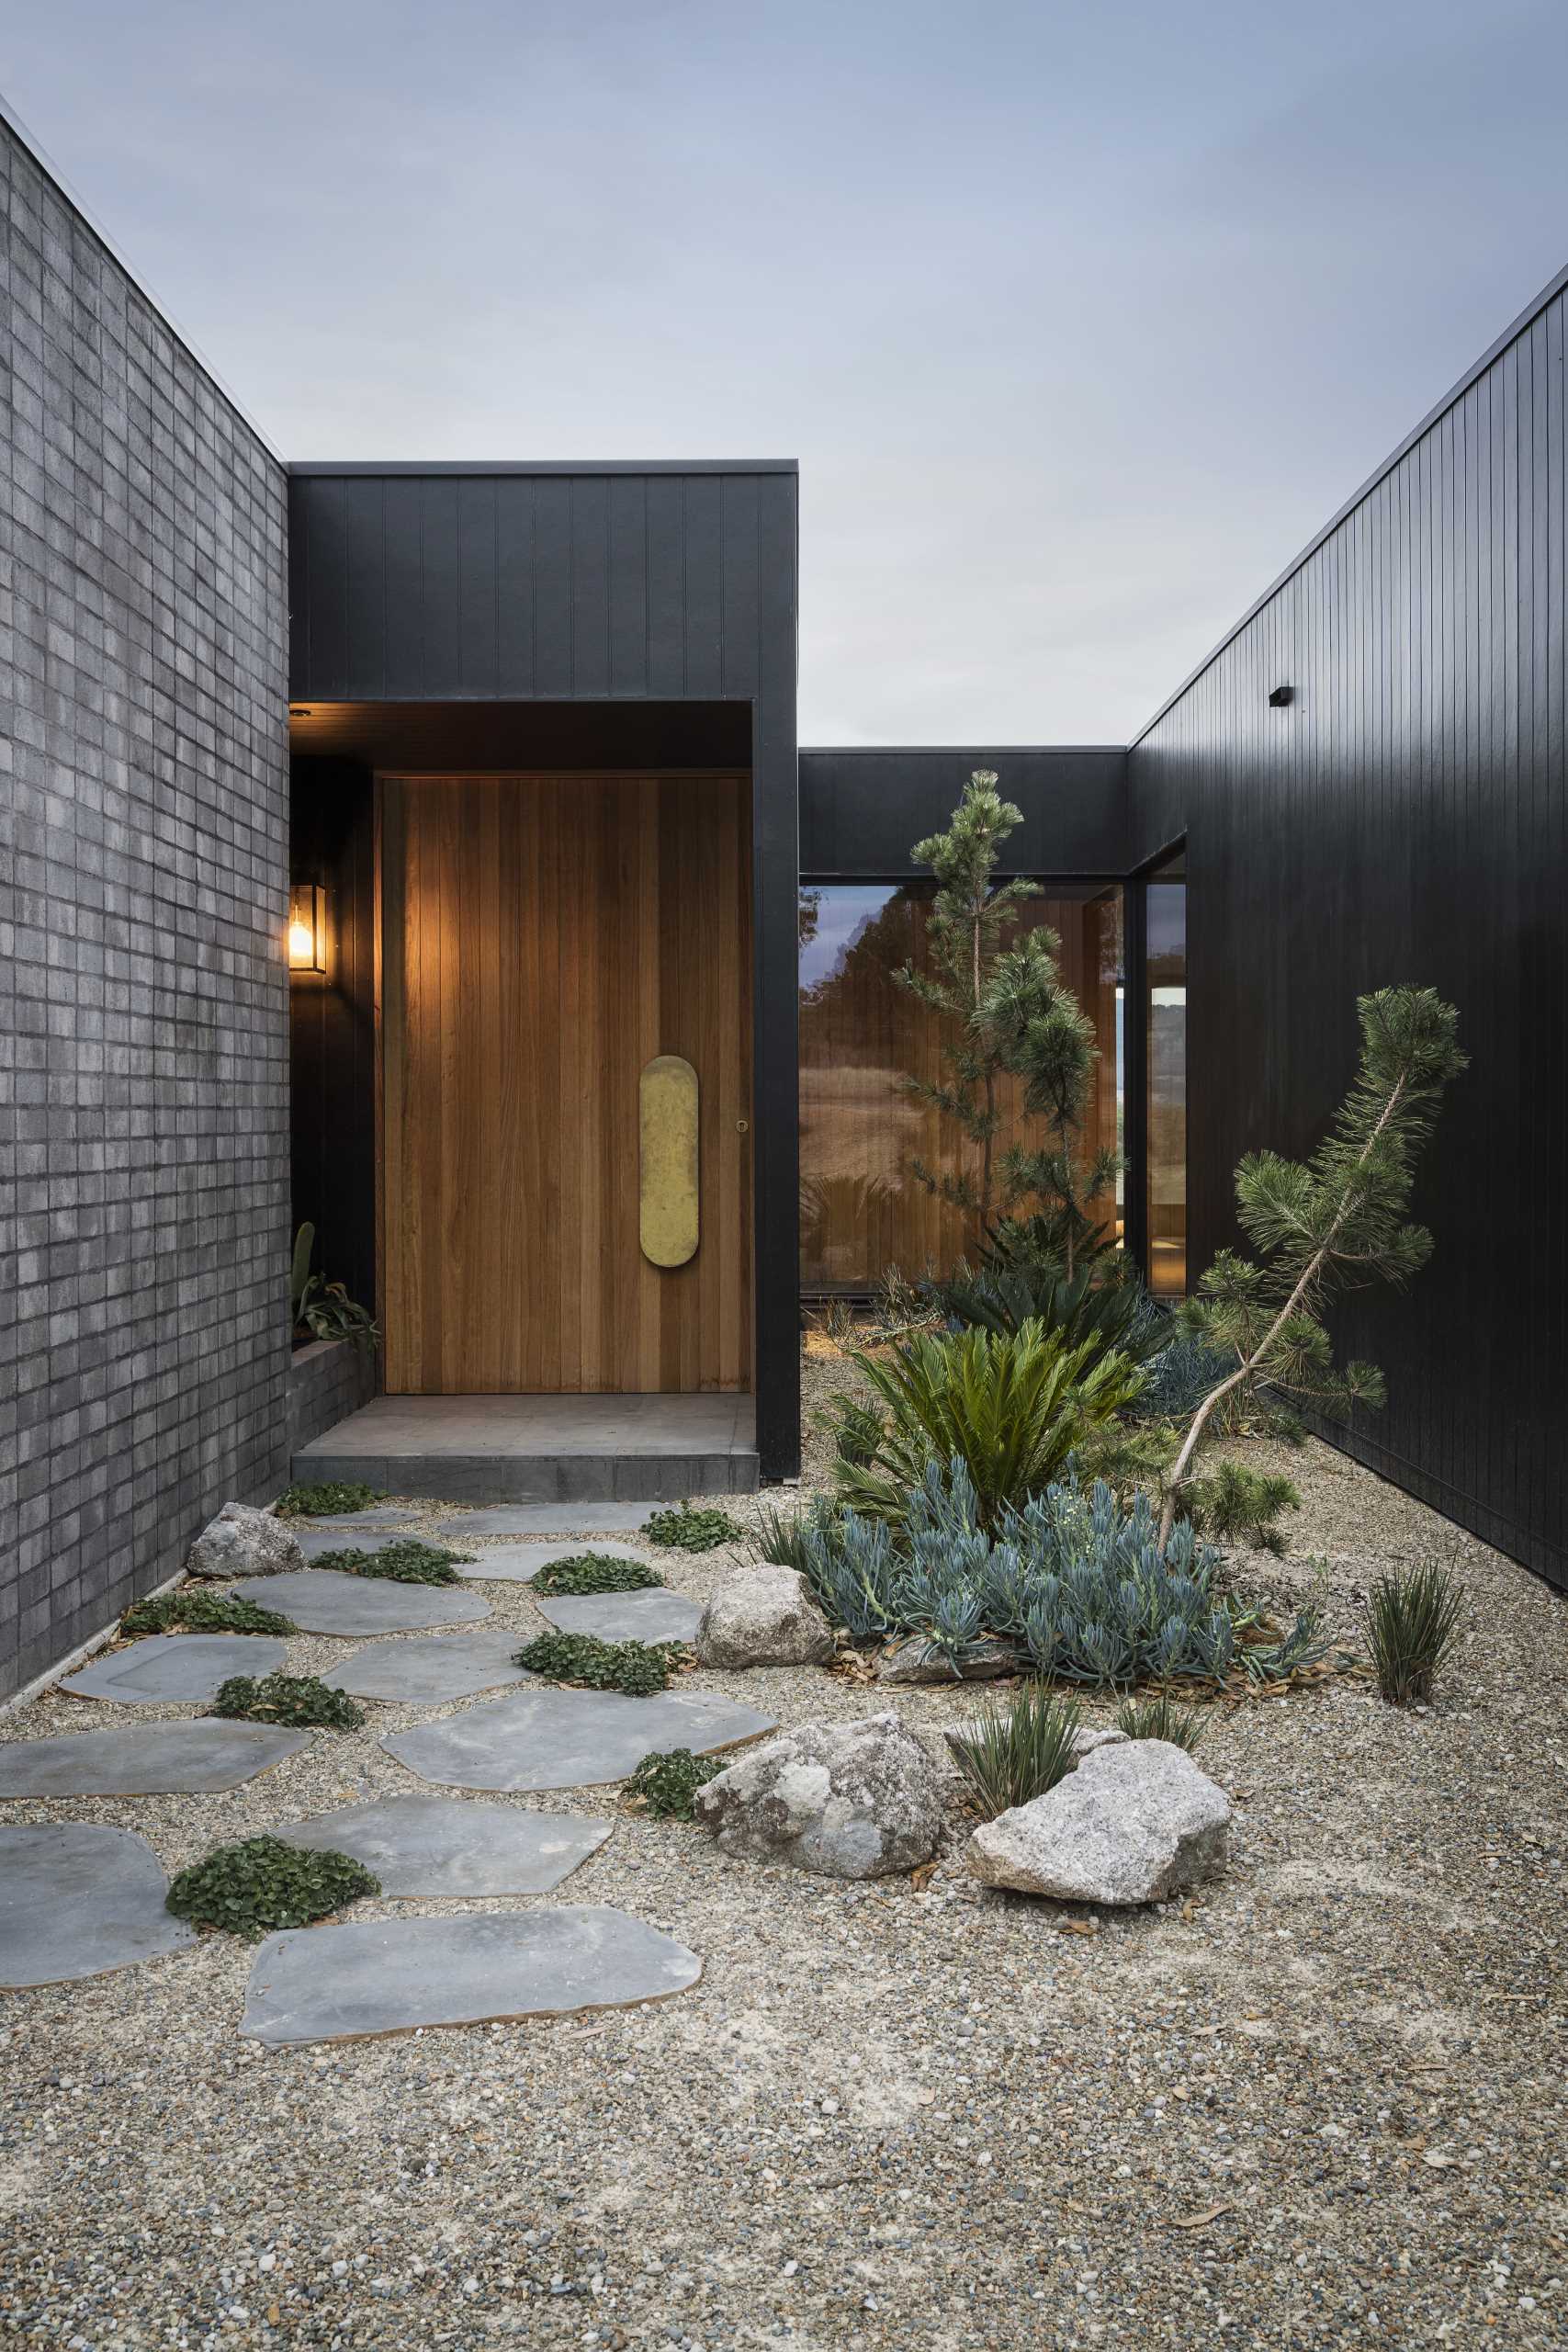 A modern home with a black exterior, includes a large wood front door with a brass handle.